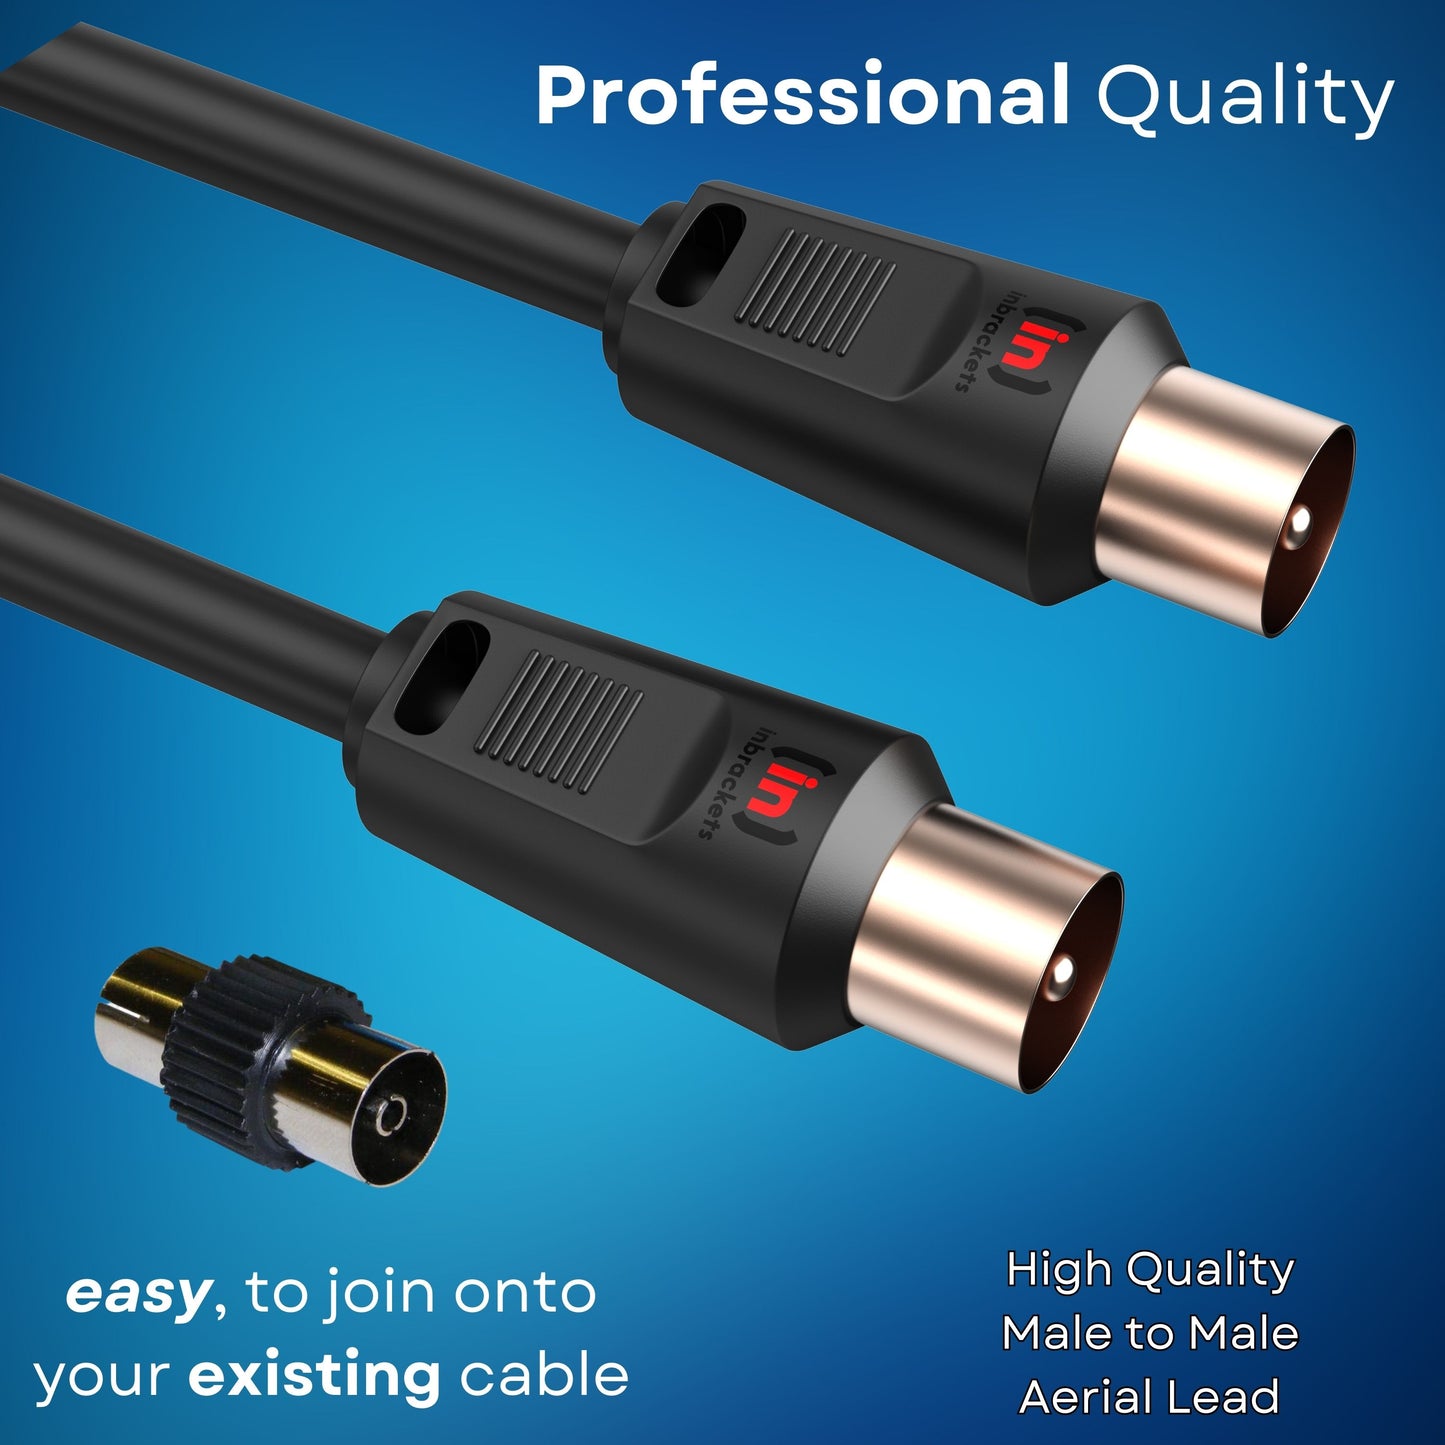 TV Aerial Coaxial Cable Male to Male - 75 Ohm, Shielded Connectors, Gold Plated for Satellite, Digital TV, and Antenna Black